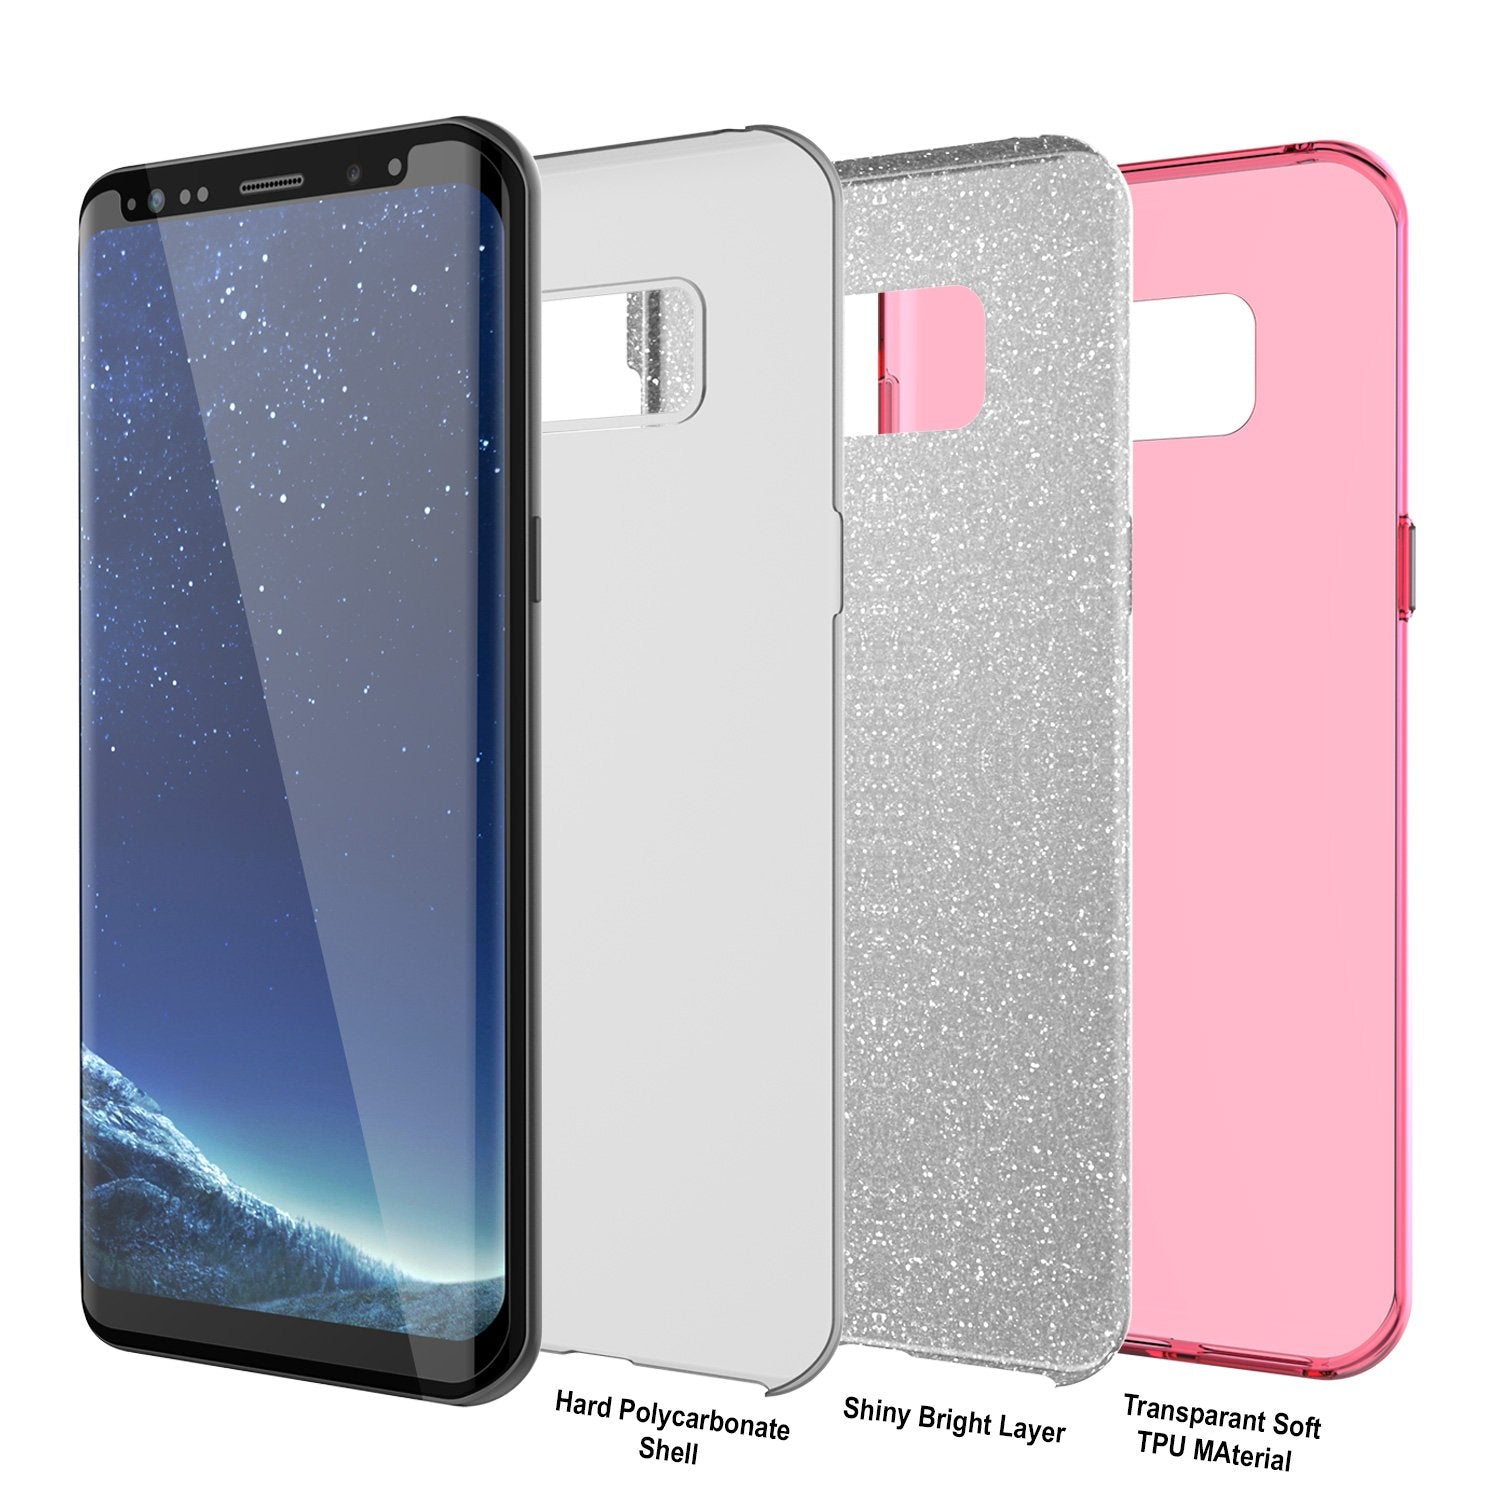 Galaxy S8 Case, Punkcase Galactic 2.0 Series Armor Pink Cover